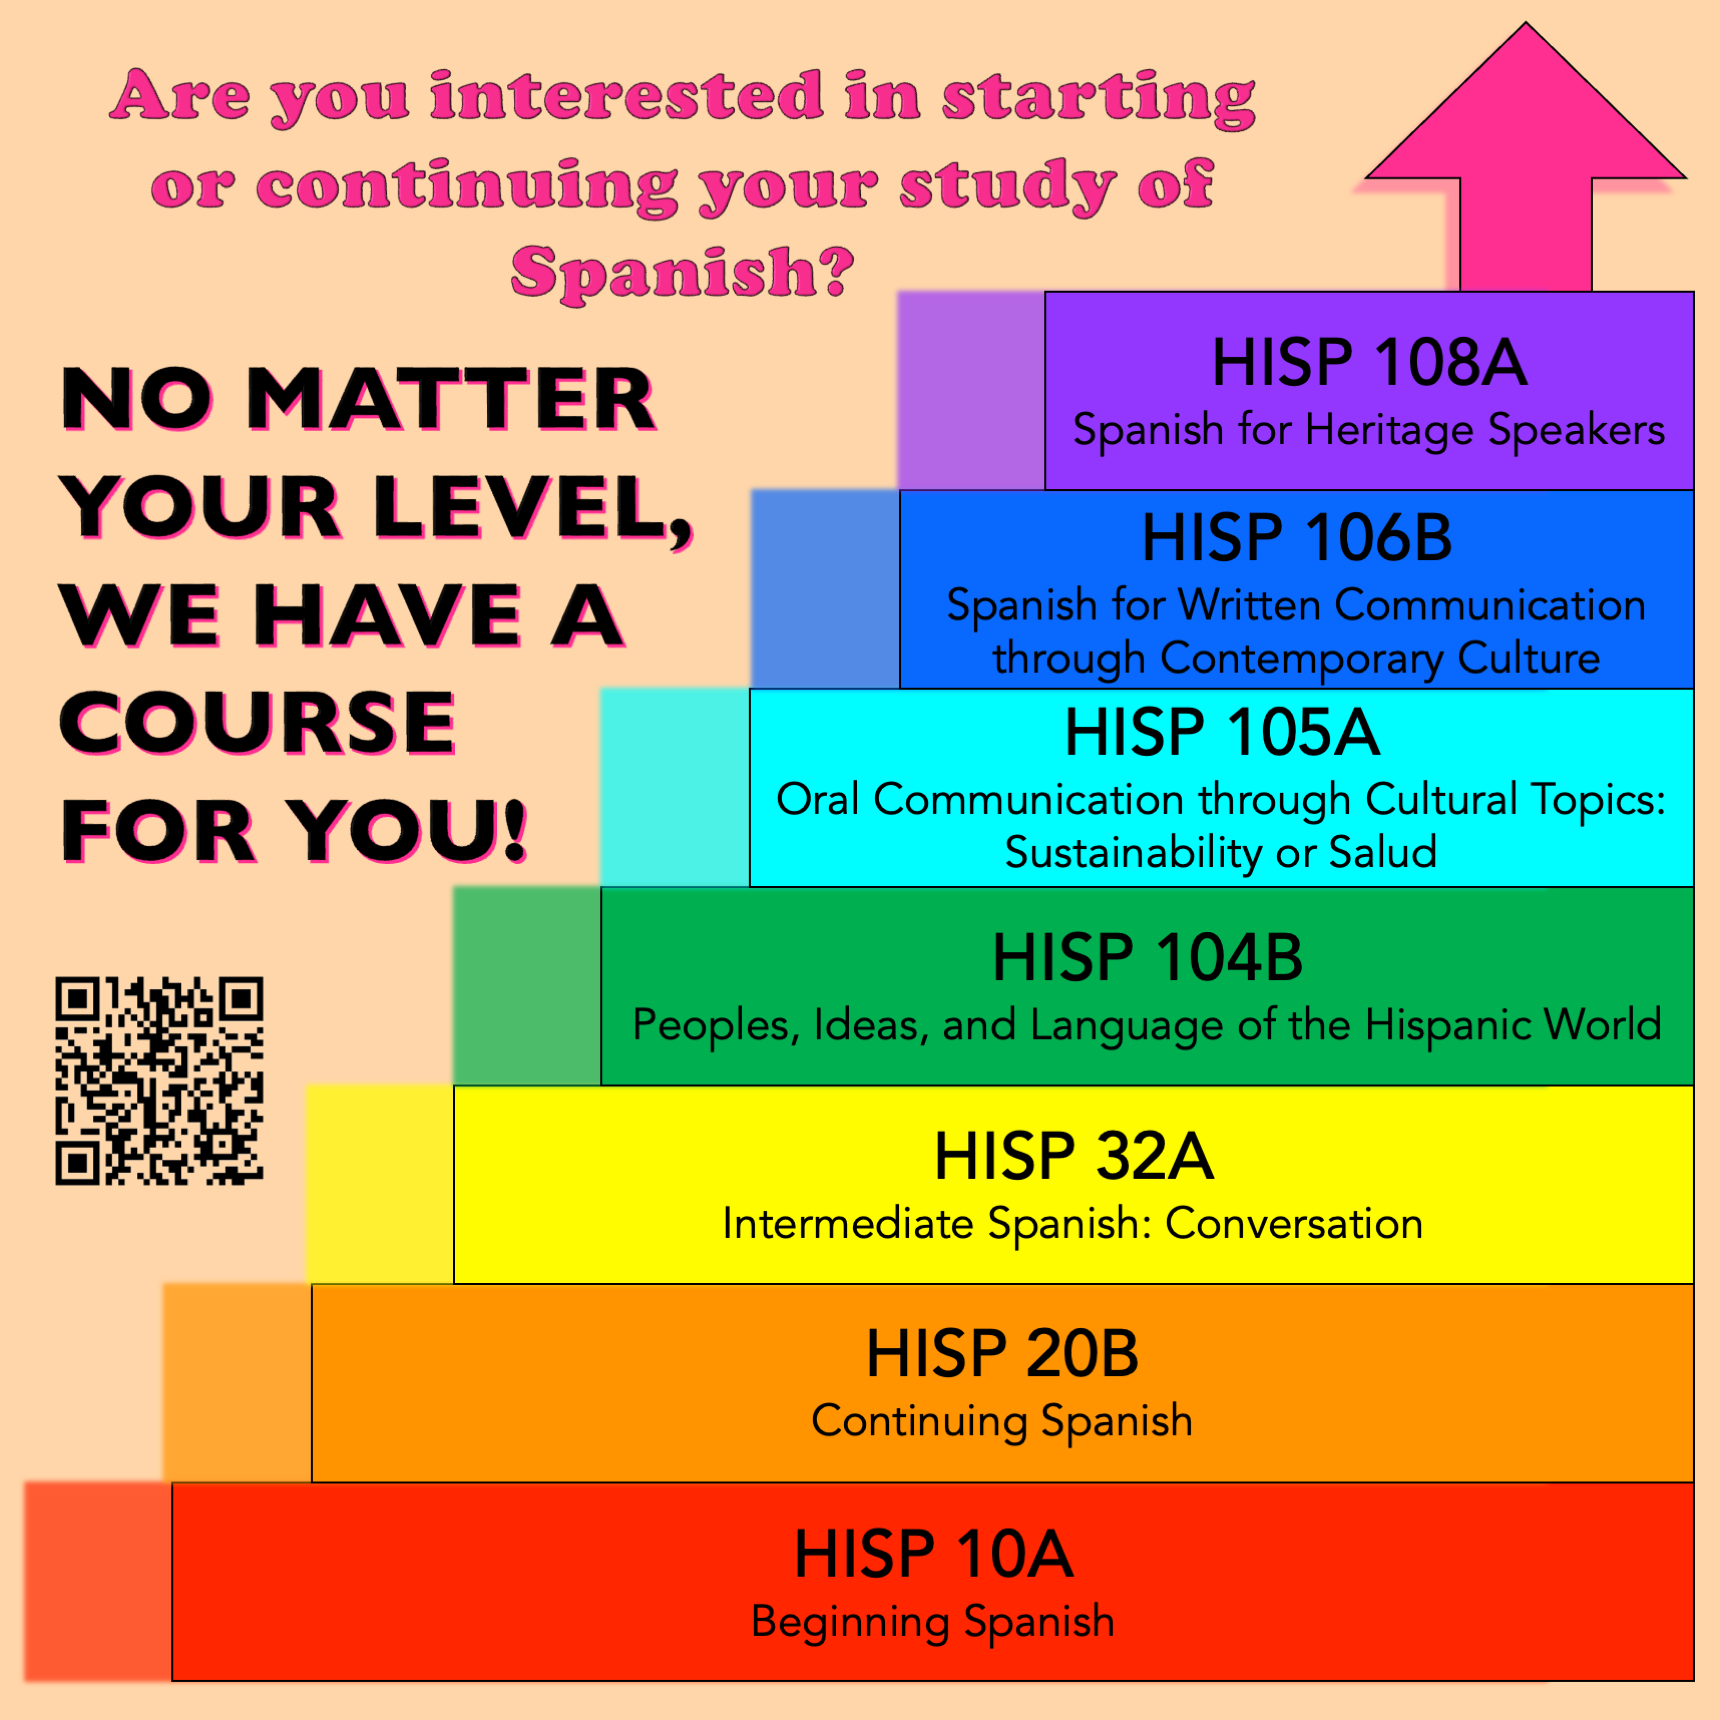 flyer for Spanish language courses with stacked blocks in rainbow colors and an arrow at the top. text reads: Are you interested in starting or continuing your study of Spanish? NO MATTER YOUR LEVEL, WE HAVE A COURSE FOR YOU!  HISP 108A Spanish for Heritage Speakers HISP 106B Spanish for Written Communication through Contemporary Culture HISP 105A Oral Communication through Cultural Topics: Sustainability or Salud HISP 104B Peoples, Ideas, and Language of the Hispanic World HISP 32A Intermediate Spanish: Conversation HISP 20B Continuing Spanish HISP 10A Beginning Spanish"